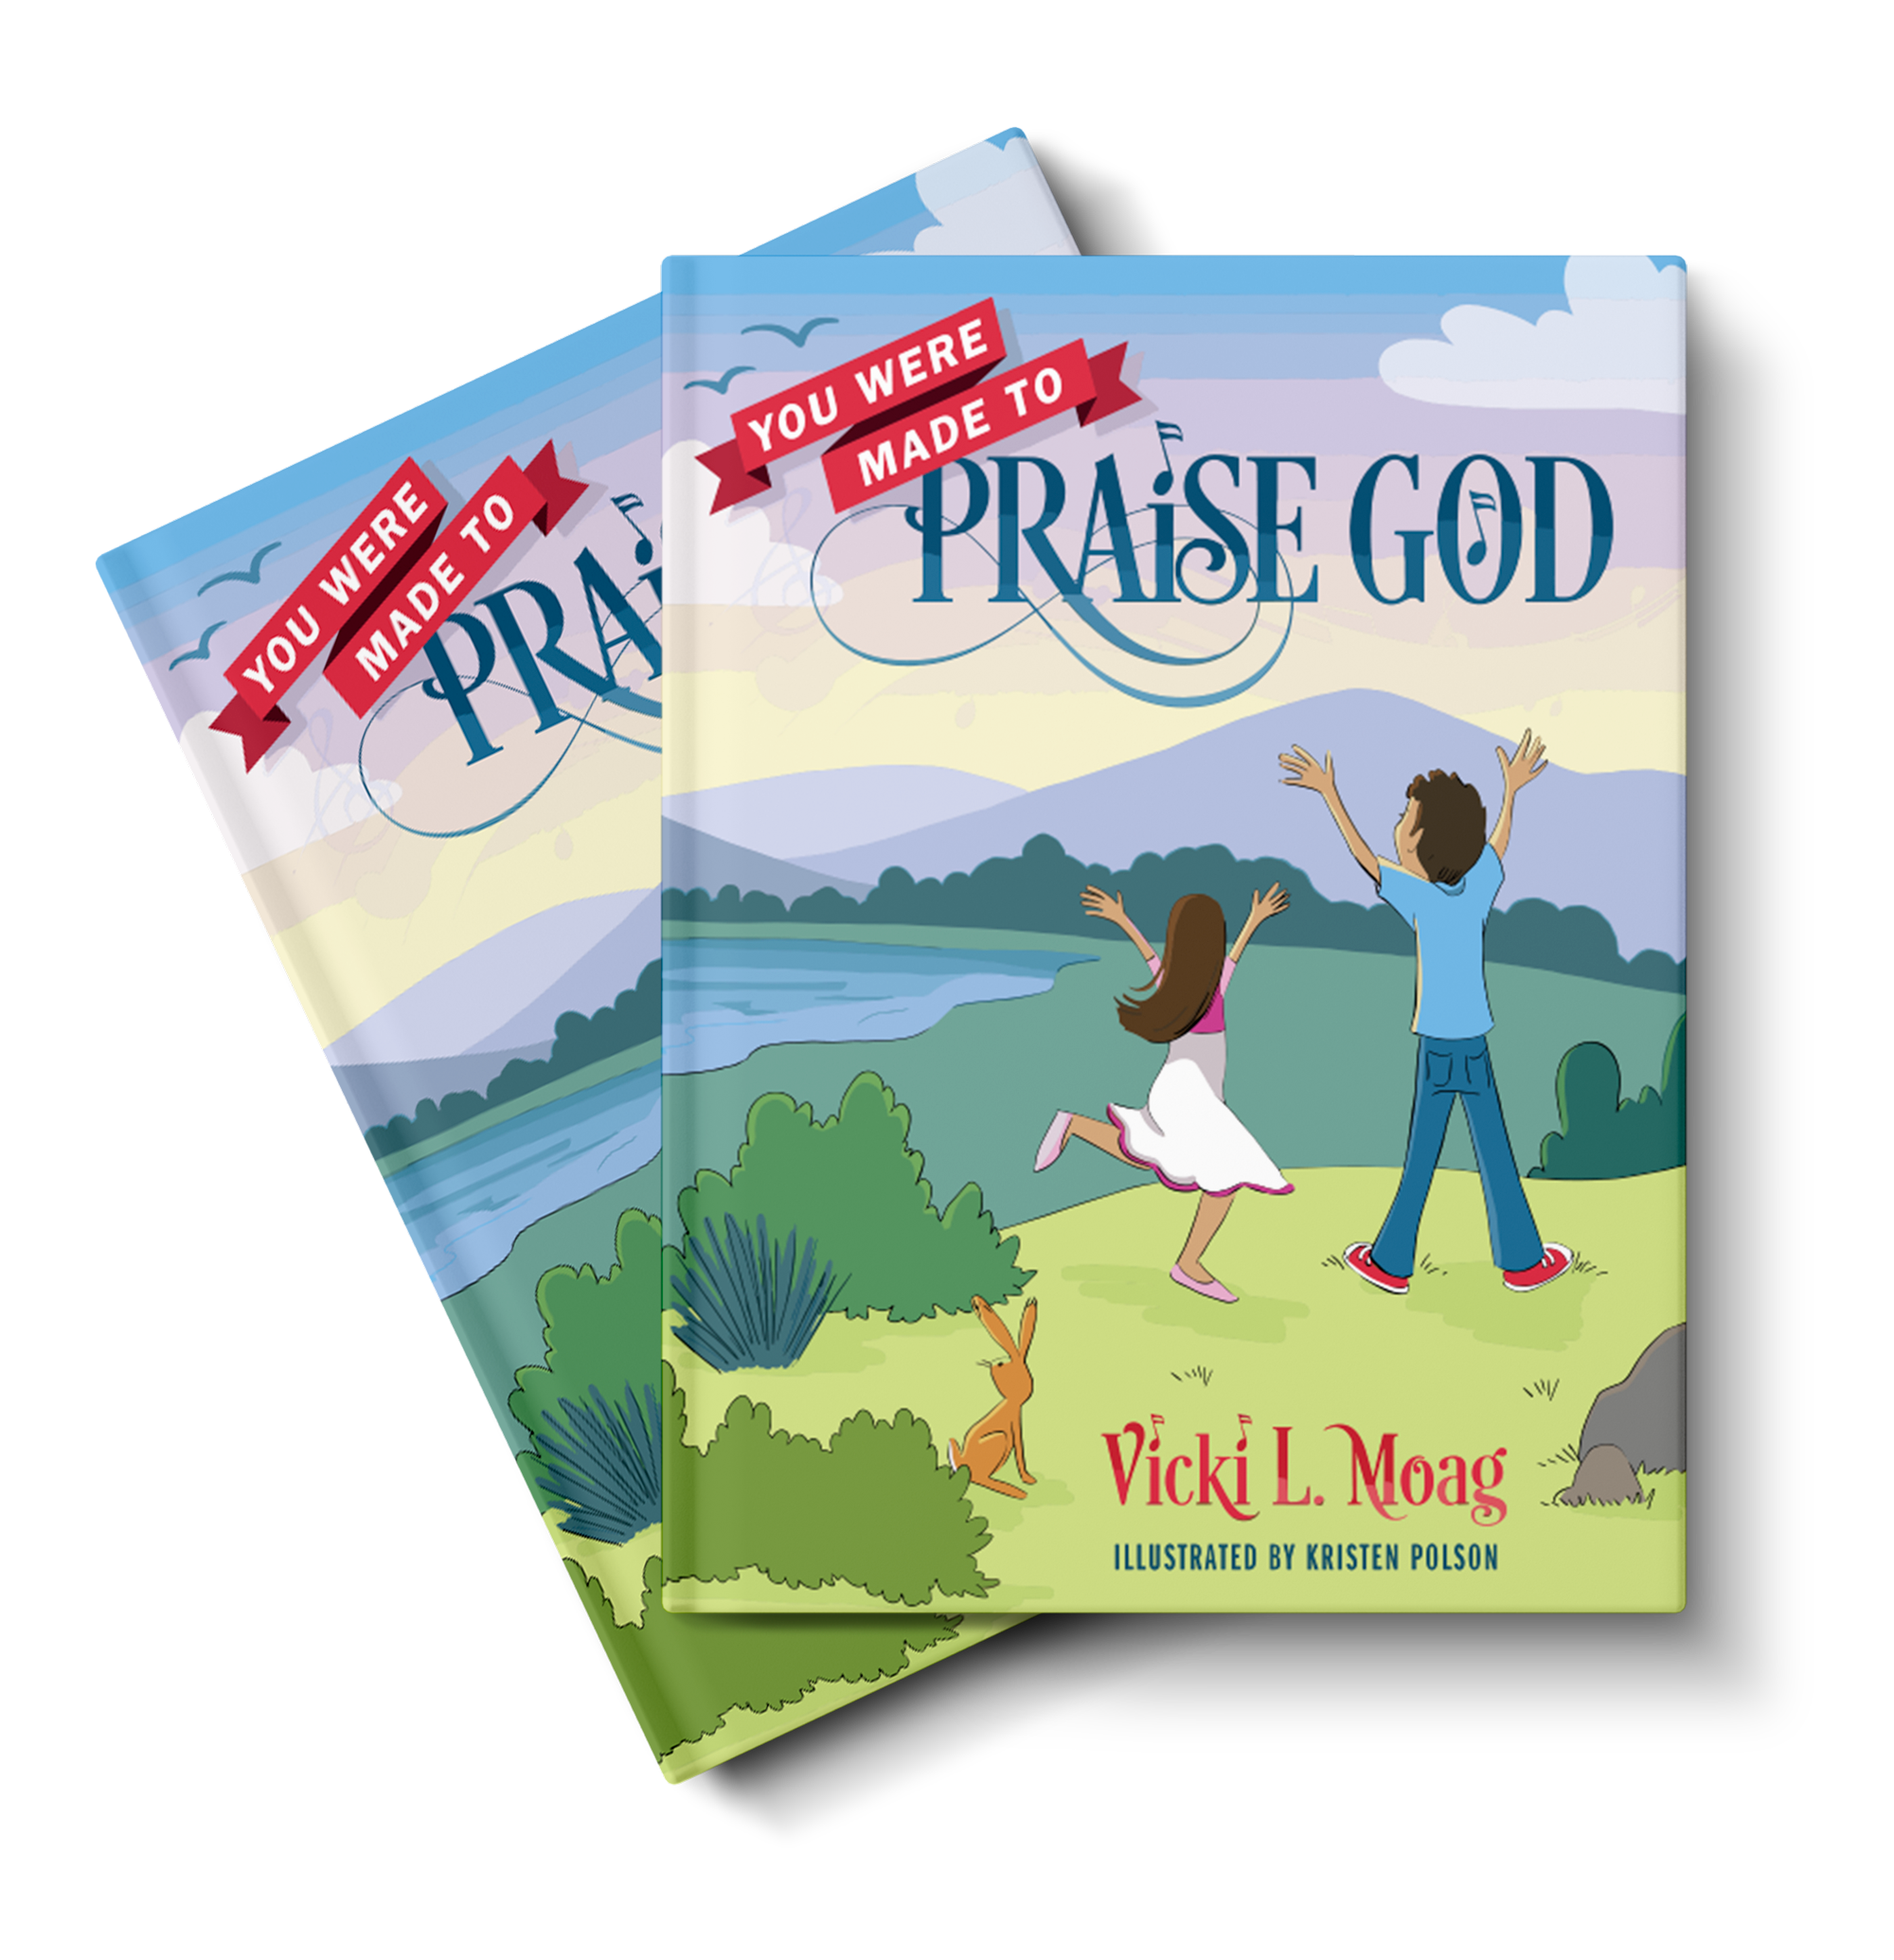 You were made to Praise God by Vicki L. Moag